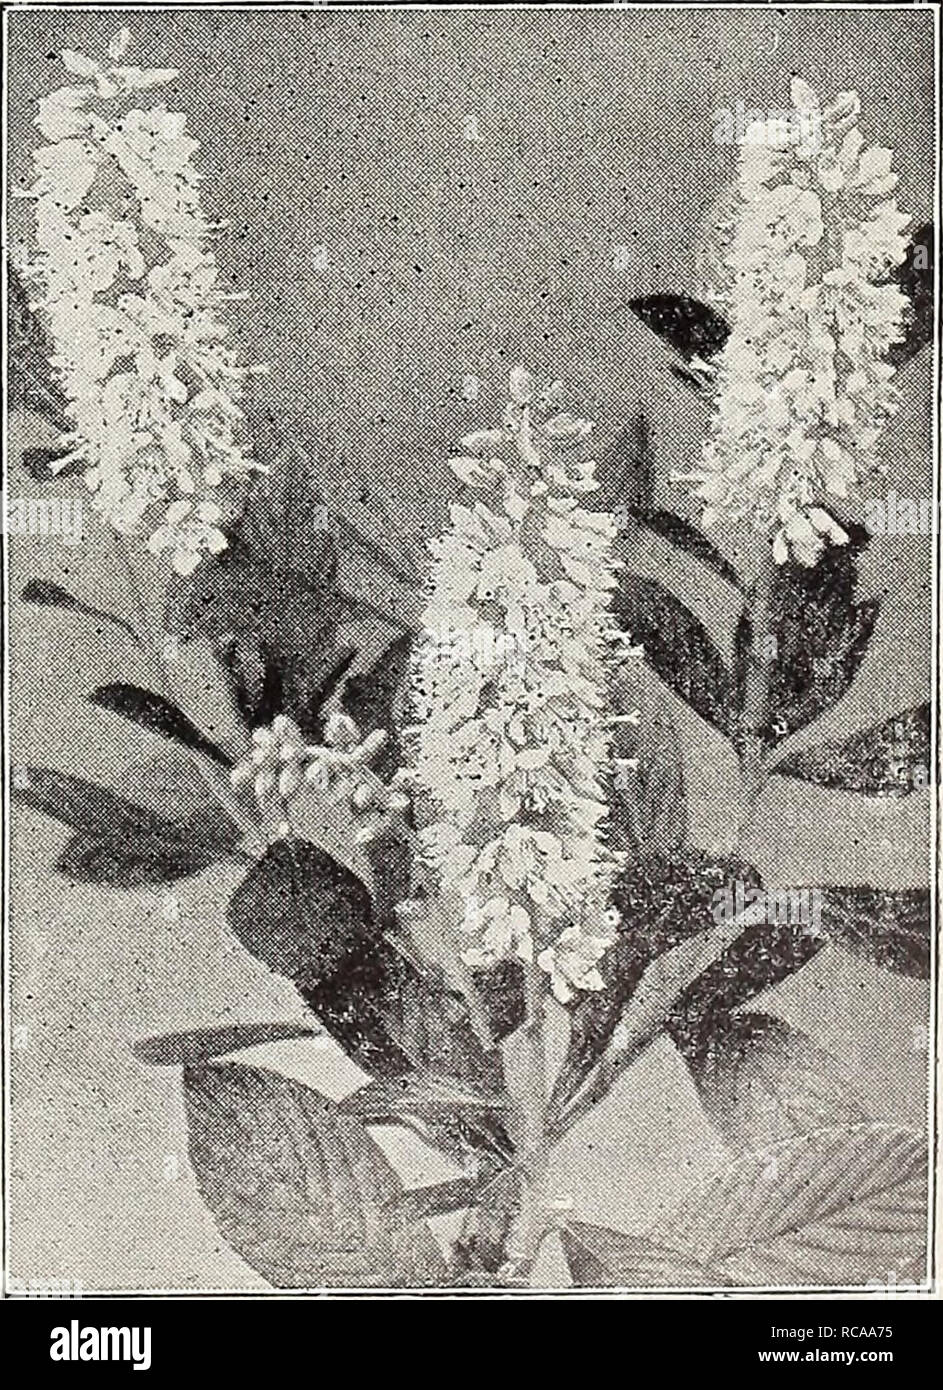 . Dreer's 1907 garden book. Seeds Catalogs; Nursery stock Catalogs; Gardening Equipment and supplies Catalogs; Flowers Seeds Catalogs; Vegetables Seeds Catalogs; Fruit Seeds Catalogs. Baccharis. (Offered on page 19&quot;). Colutea Arborescens (Bfad. der Senna). A large Shrub, with small, delicate foliage and yellow, pea-shaped blos- soms, flowering in June, fol- lowed by reddish pods or bladders. 25 cts. each. Cochorus, or Kerria Japon = ica fl. pi. {Globe Flower). A graceful Shrub, with double- yellow flowers, from June to October. 25 cts. each. Crataegus Oxyacantha fl. pi. (Double-flozvering Stock Photo